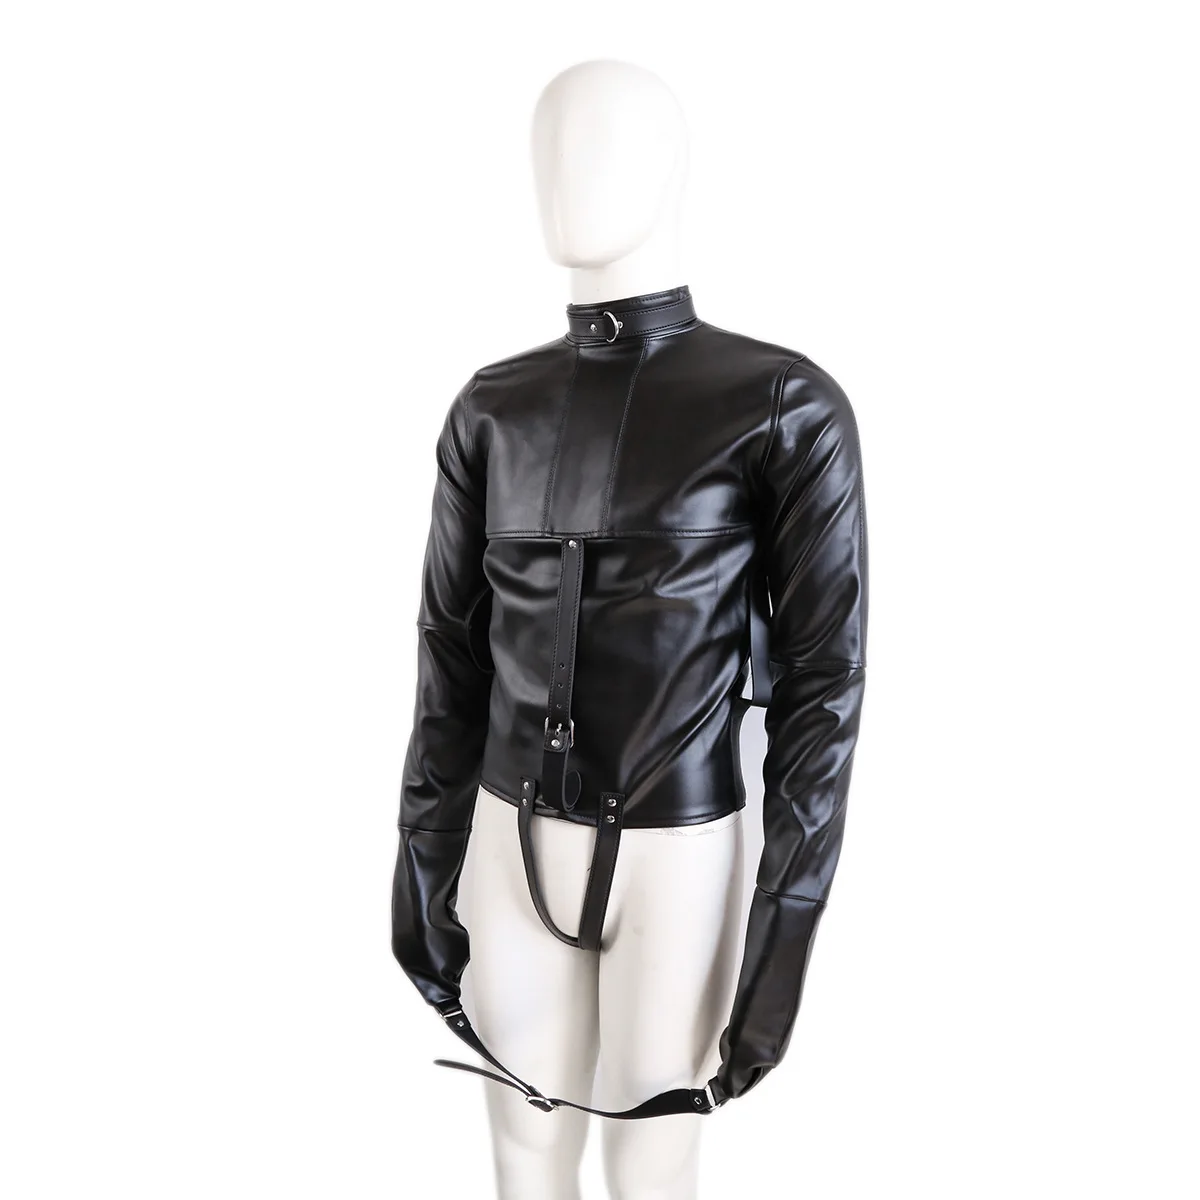 

Thierry Adult Game SM Products Pu Leather Bondage Jacket with Long Sleeves, Fetish Restraint Straitjacket Sex Toys For Couple